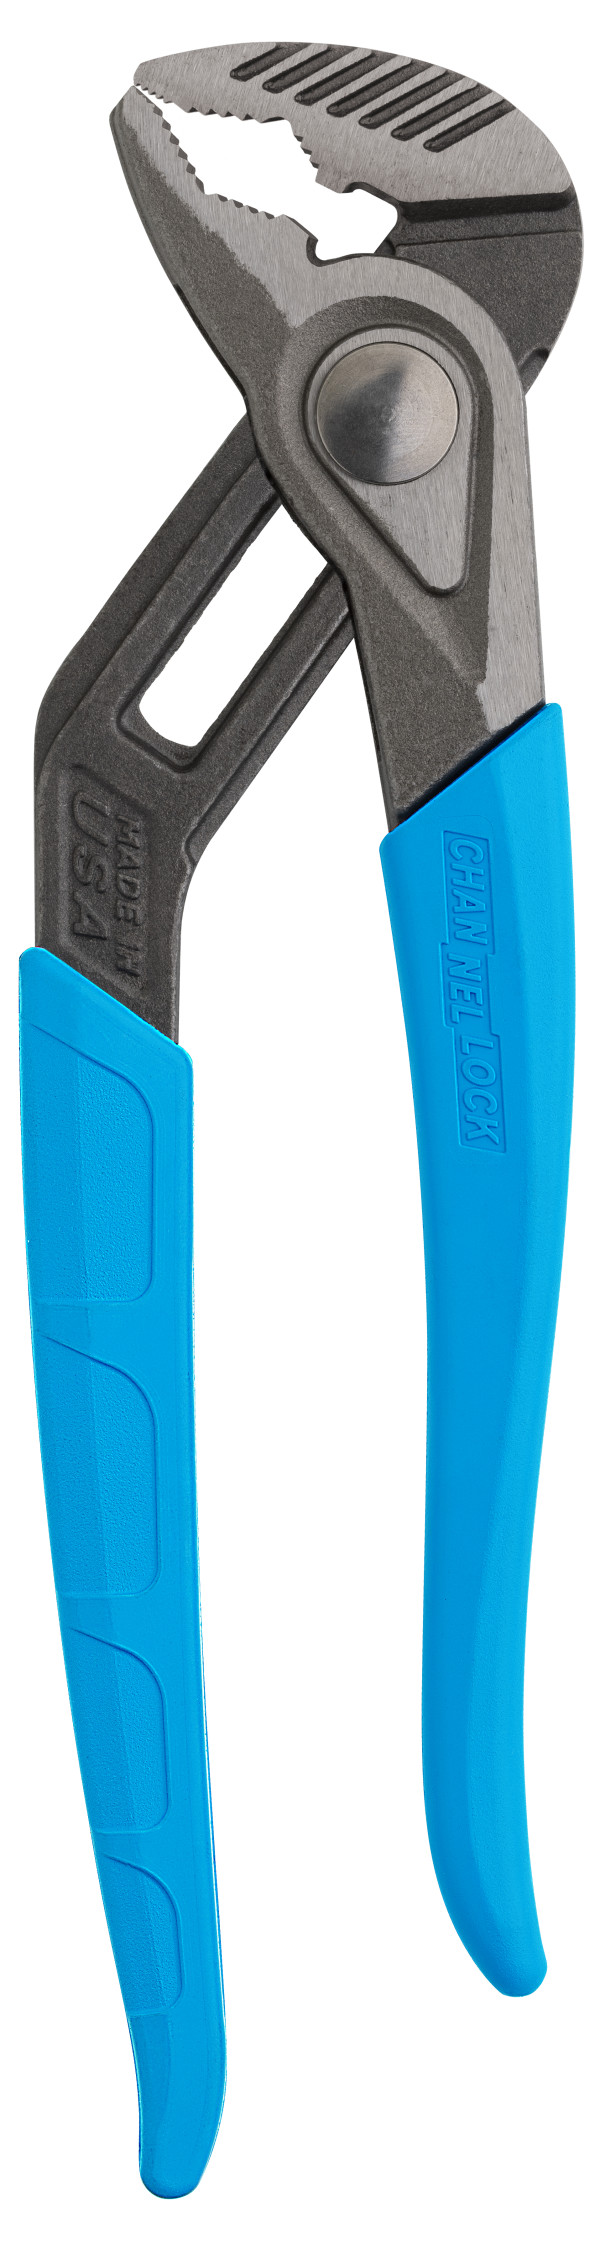 442X 12-inch SPEEDGRIP V-Jaw Tongue & Groove Pliers